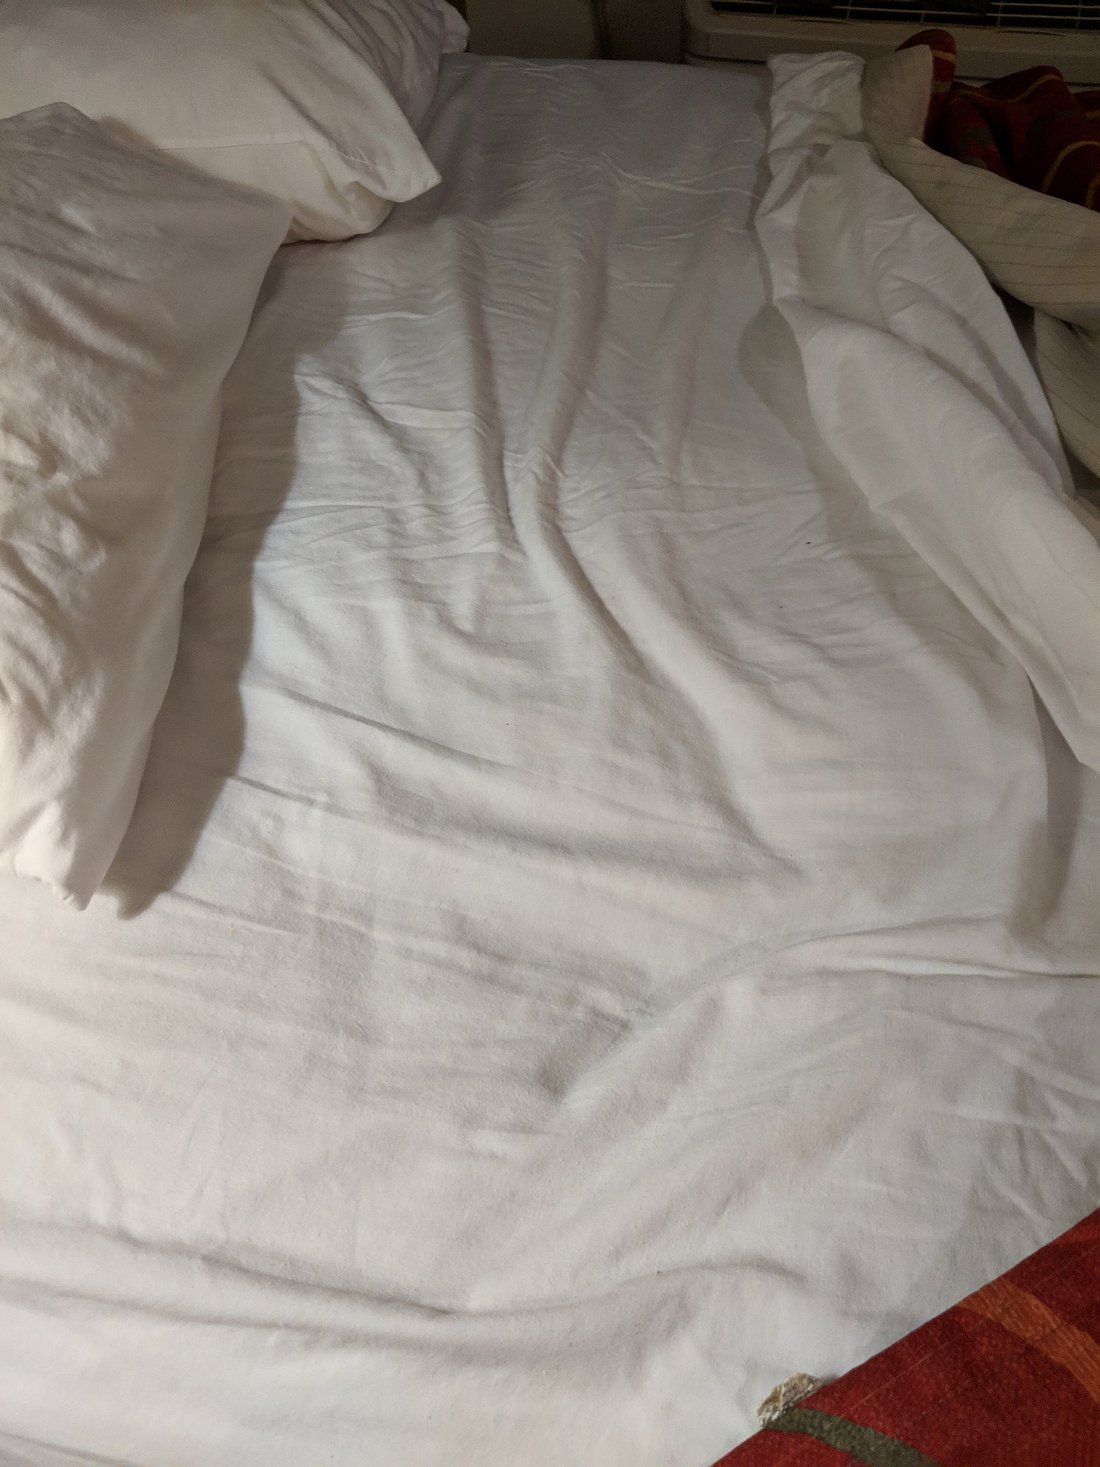 My cousin slept on this mattress for 2 nights before stripping it only to  notice the dried blood (La Quinta - Downtown Denver, CO). : r/Wellthatsucks